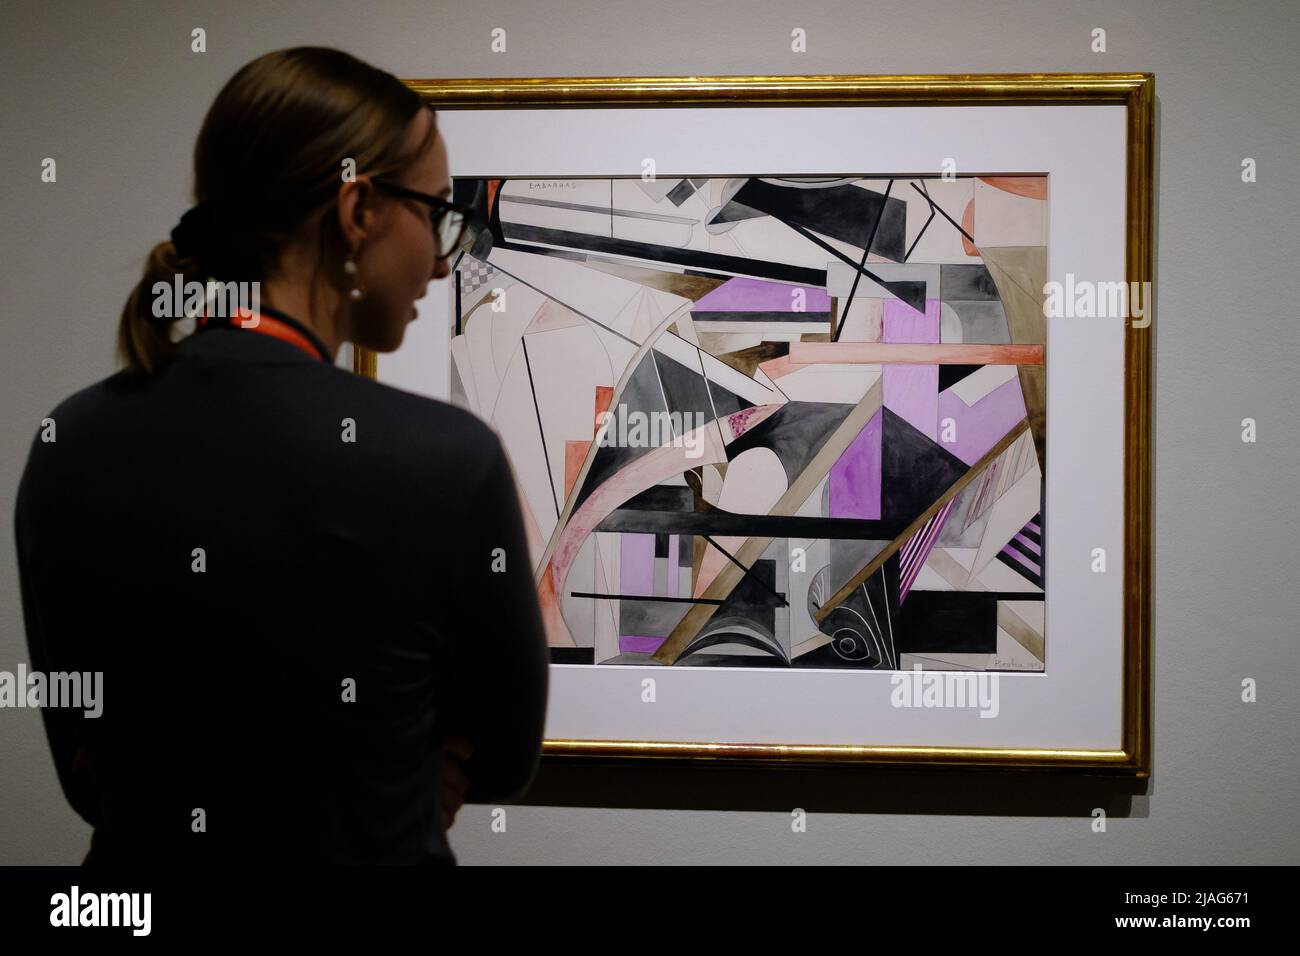 A woman looks at the painting Francis Picabia during the exhibition 'Artist Letters in the Anne-Marie Springer Collection' at the Museo Nacional Thyssen-Bornemisza in Madrid. The Thyssen-Bornemisza National Museum presents, for the first time in Spain, a selection of letters and postcards written by painters such as Delacroix, Manet, Degas, Monet, Cézanne, Van Gogh, Gauguin, Matisse, Juan Gris, Frida Kahlo or Lucian Freud, belonging to the Anne-Marie Springer collection, in dialogue with works by these and other artists in the permanent collection. (Photo by Atilano Garcia/SOPA Images/Sipa U Stock Photo